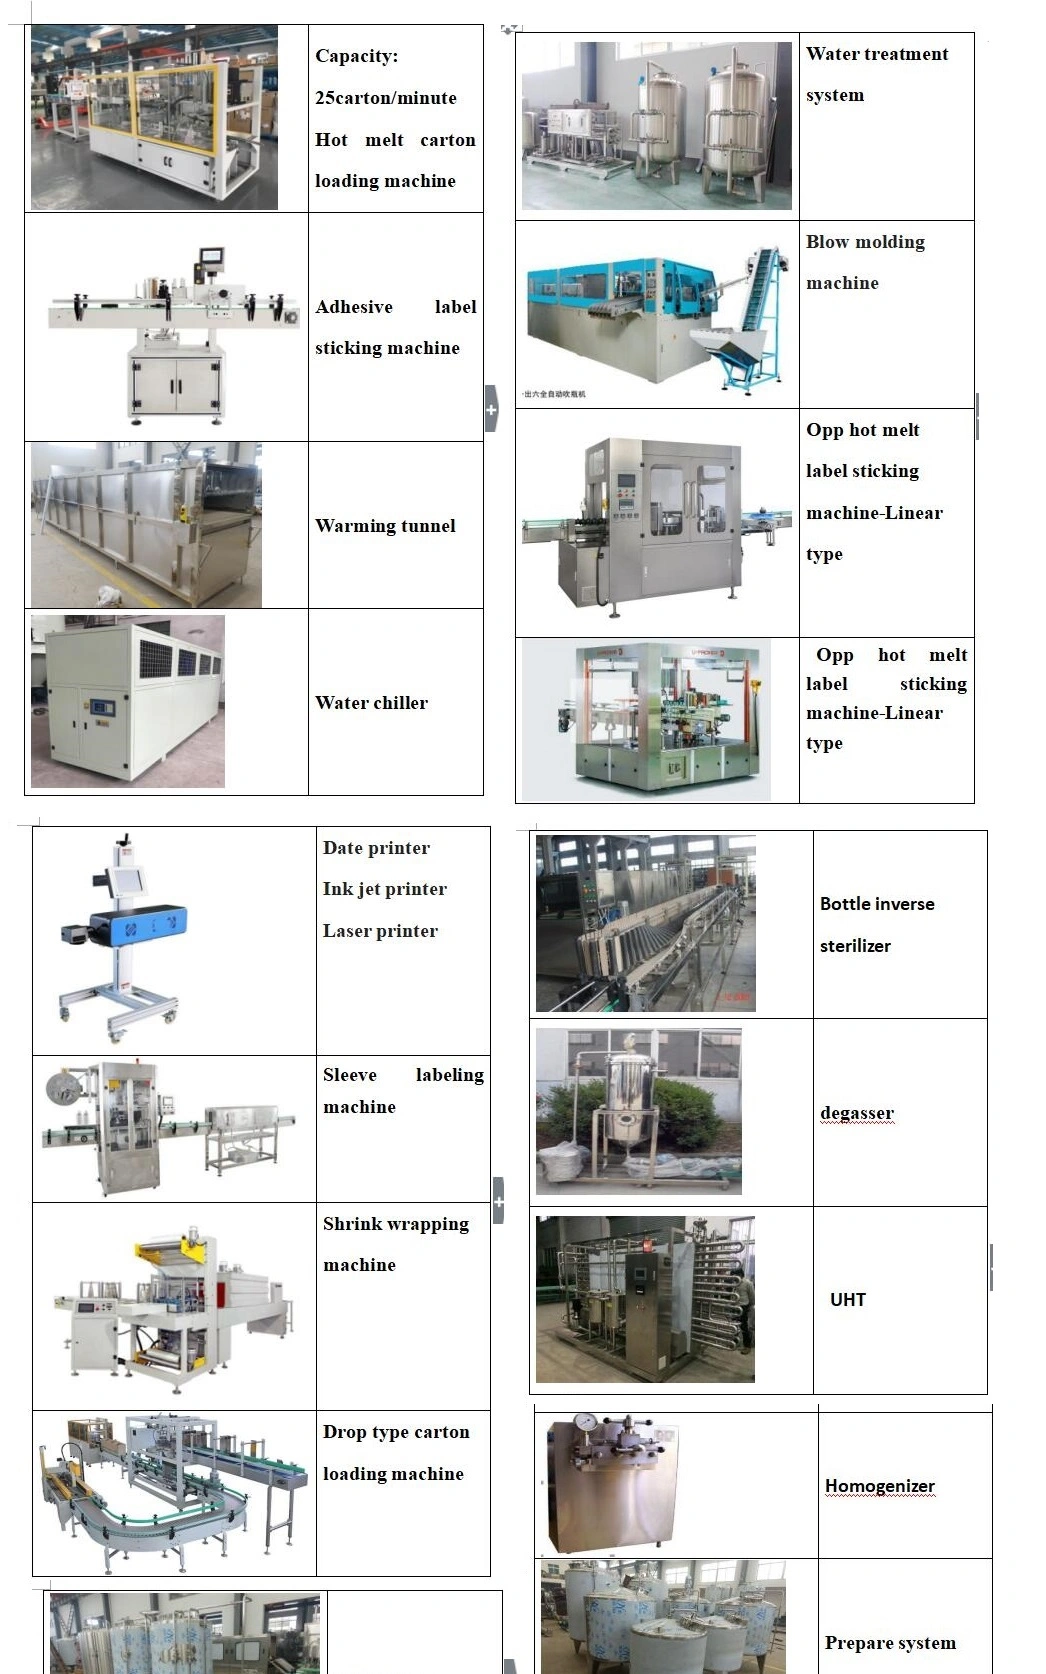 Automatic Pet Water Bottle Filling and Capping Machine